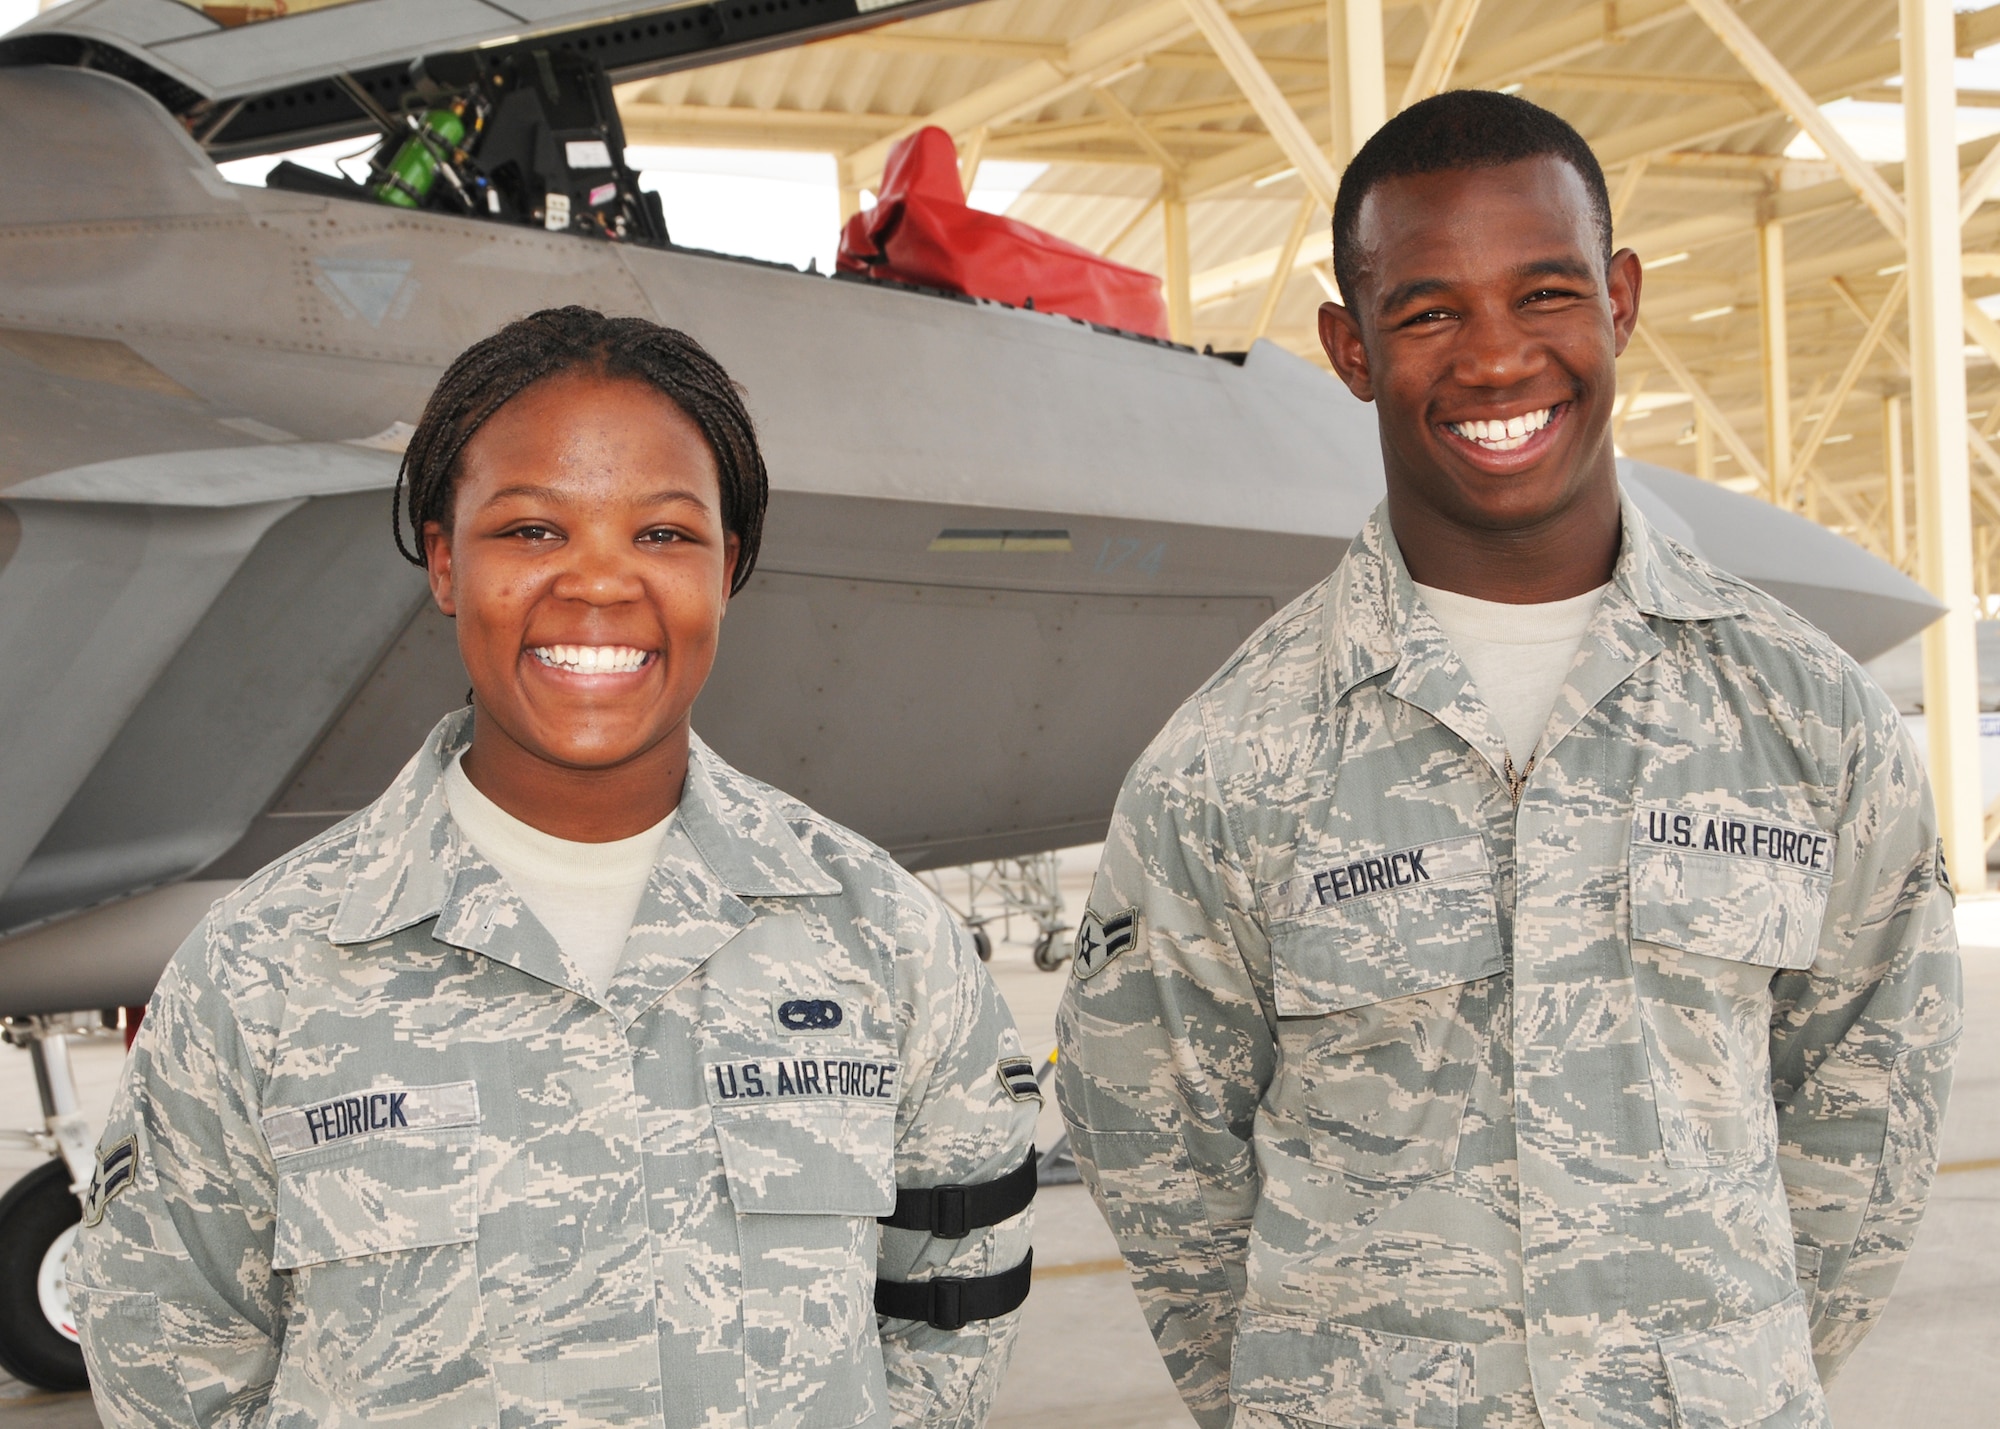 Air Force Airmen First Class Celecca and Tevin Fedrick stand near an F-22 Raptor fighter aircraft during a break in their work schedule. The deployed sister and brother are serving with the 380th Air Expeditionary Wing at an undisclosed location in Southwest Asia. (U.S. Air Force photo by Senior Master Sgt. Eric Peterson/Released)